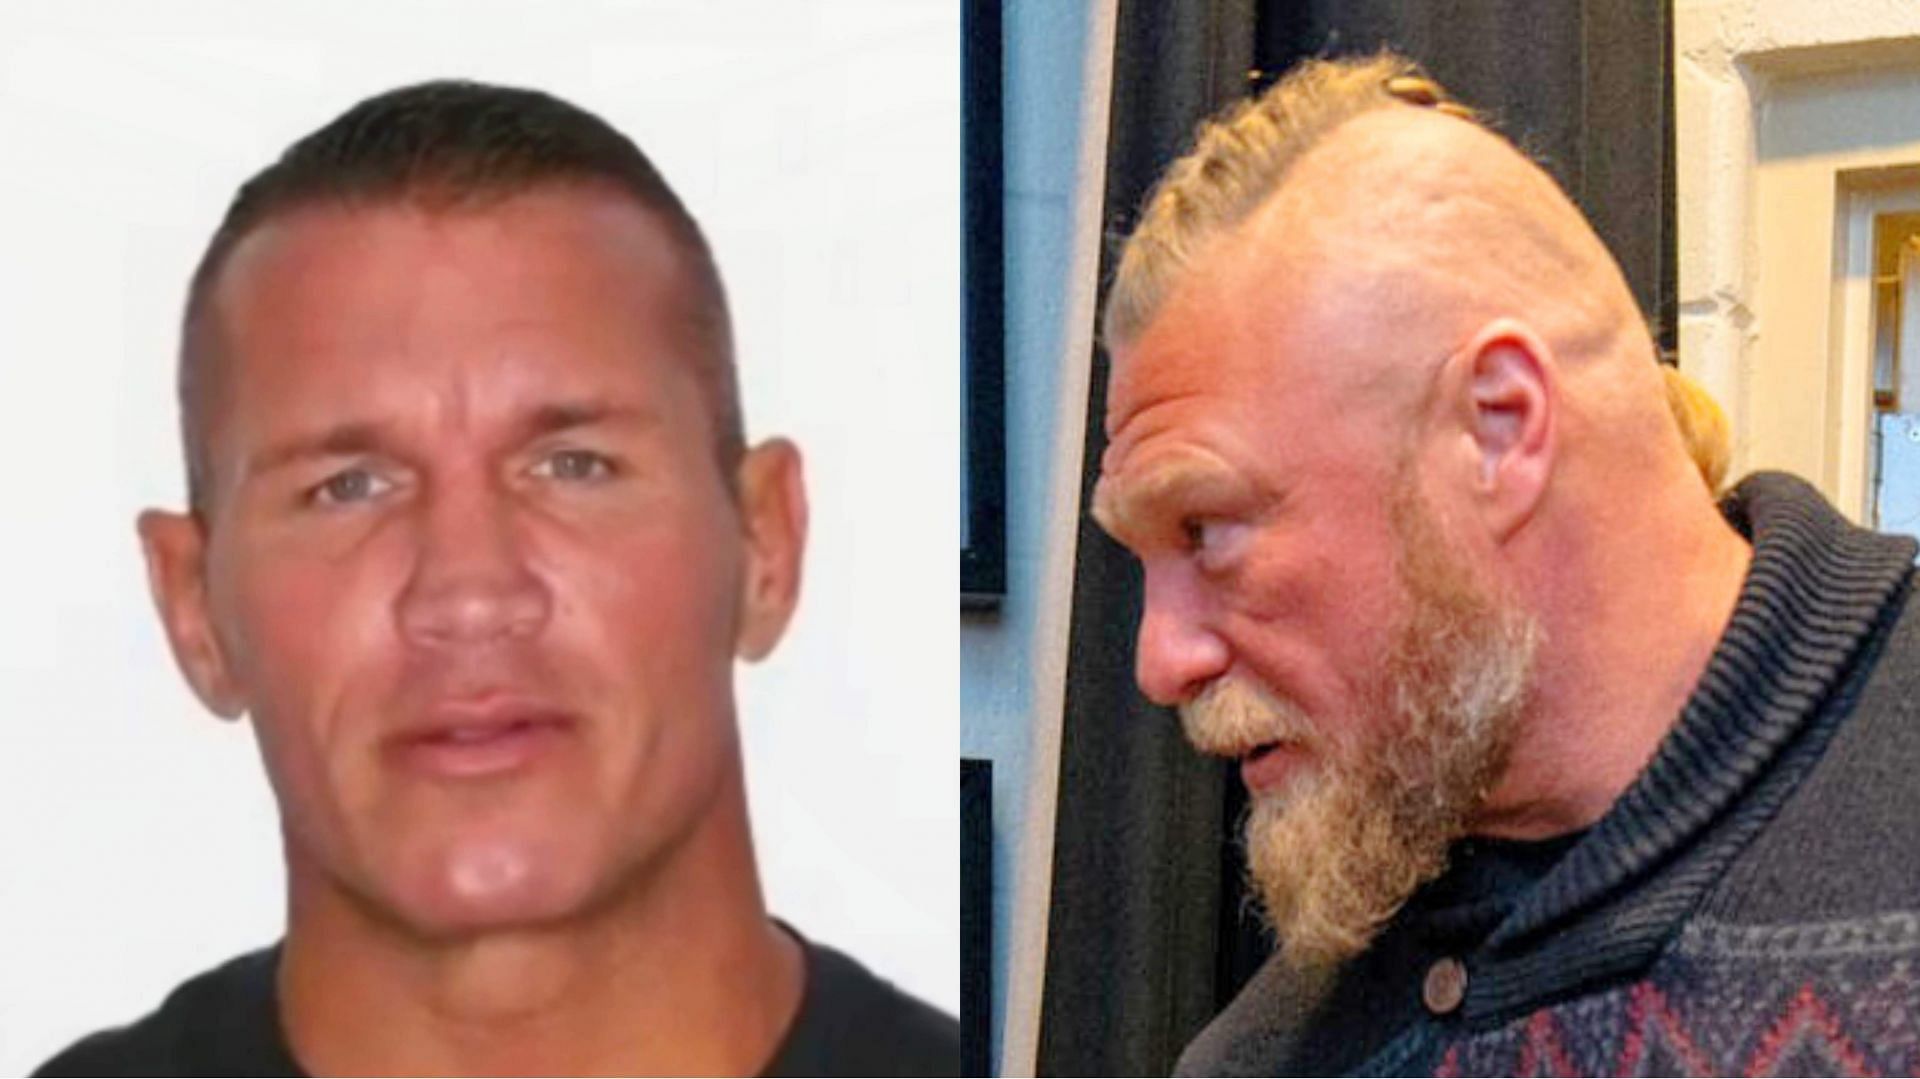 Randy Orton (left) and Brock Lesnar (right) have won many WWE championships